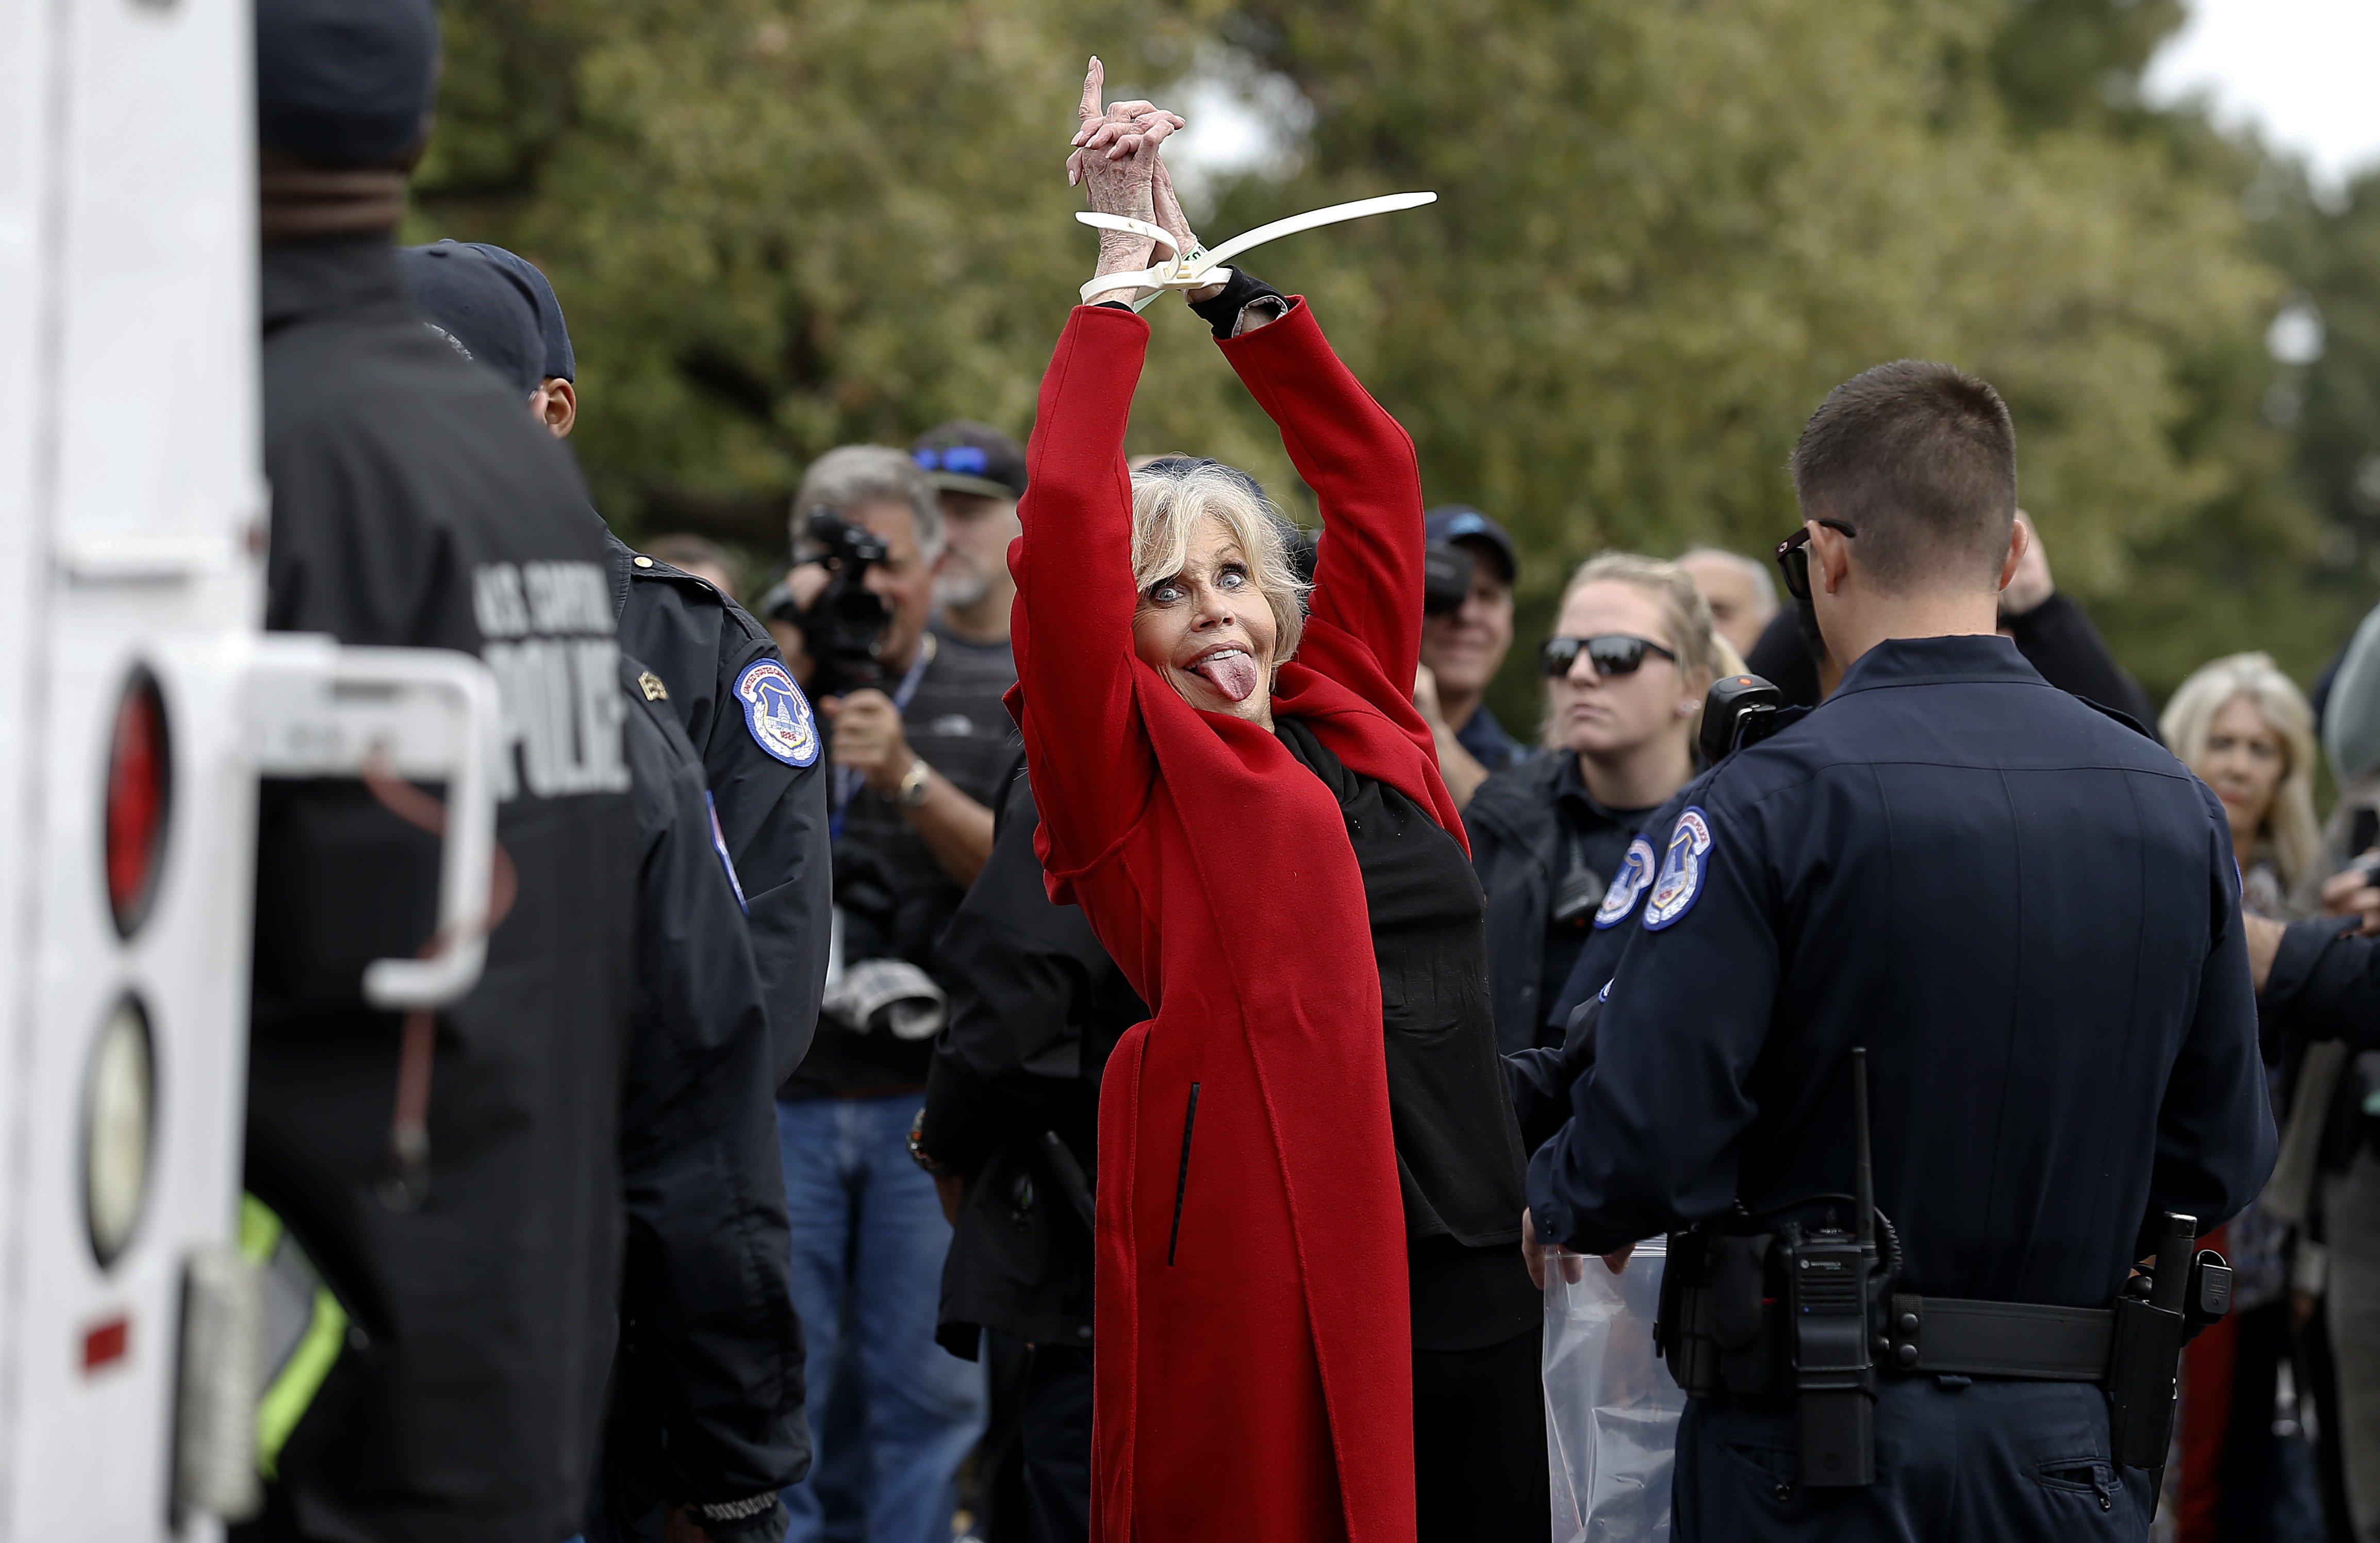 Jane Fonda arrested during the "Fire Drill Friday" Climate Change Protest on October 25, 2019, in Washington, D.C. | Source: Getty Images